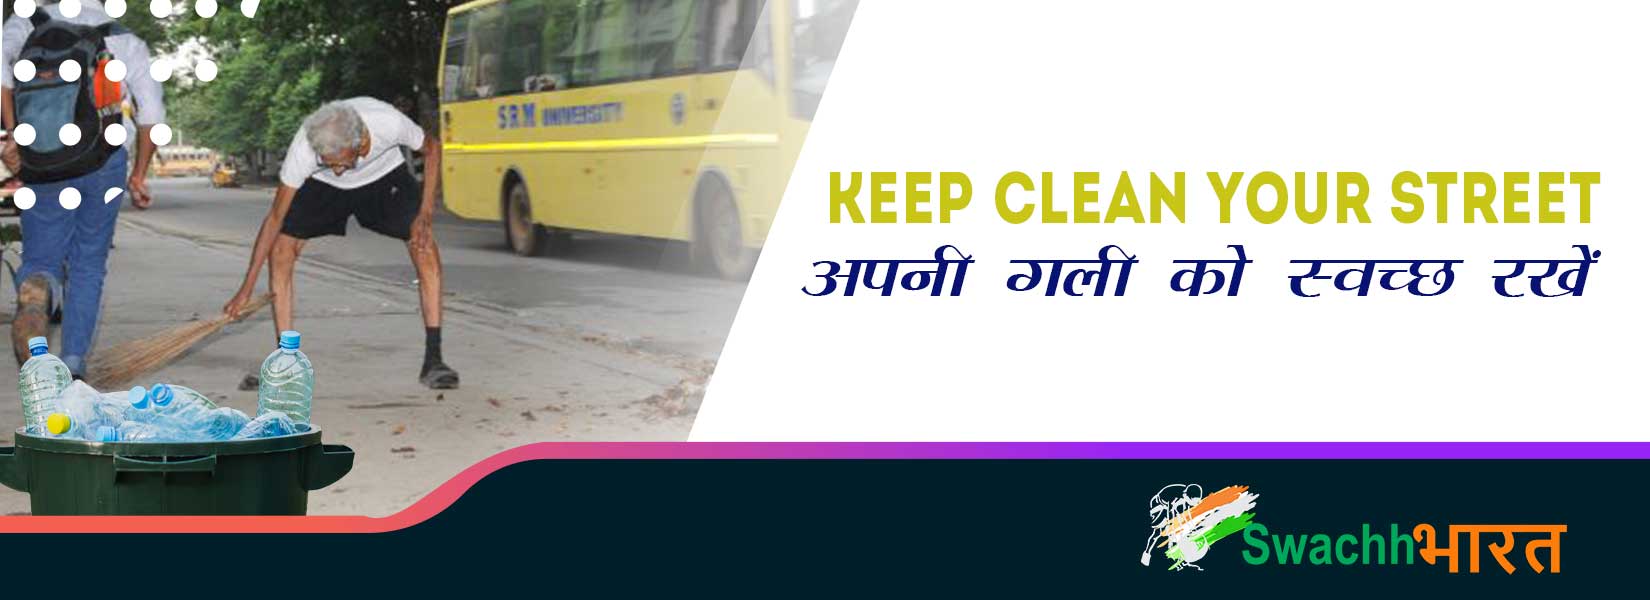 keep-clean-your-street